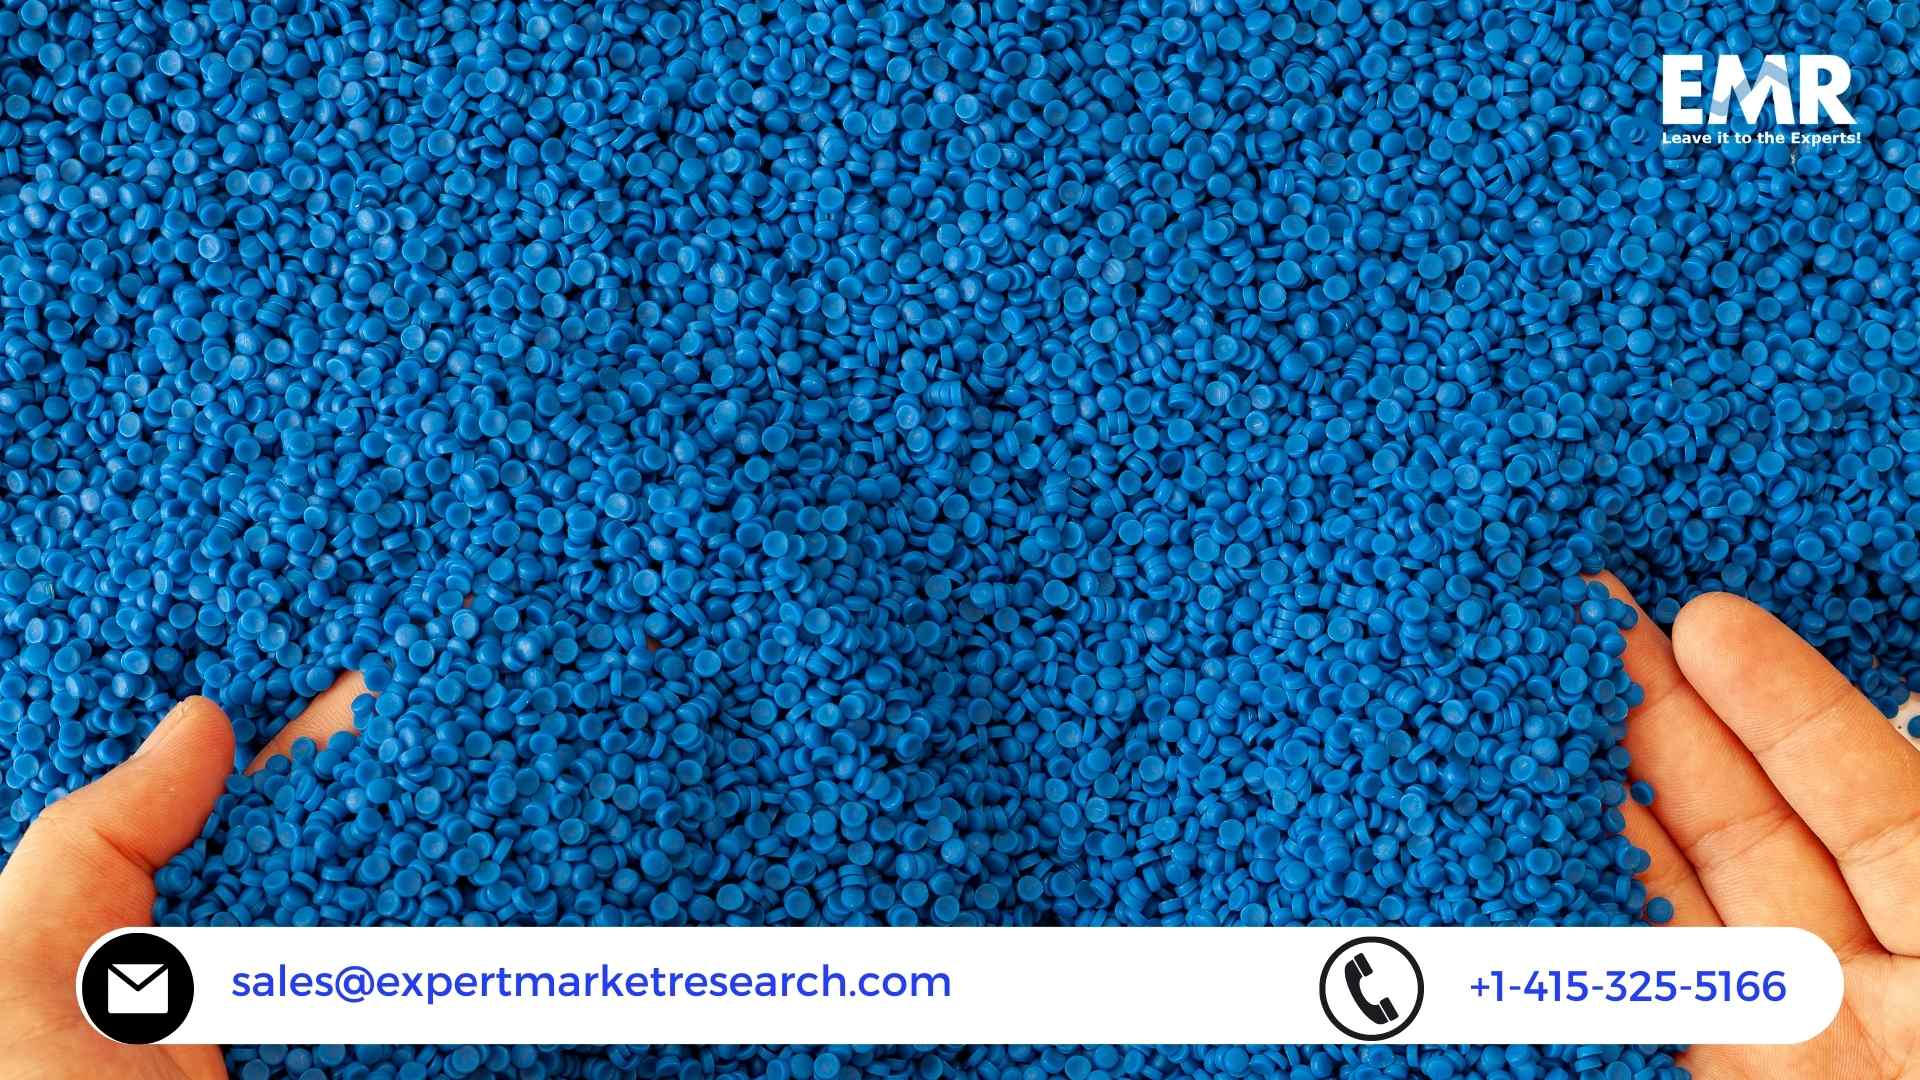 Global Plastic Compounding Market Size To Grow At A CAGR Of 7.7% In The Forecast Period Of 2022-2027 | EMR Inc.